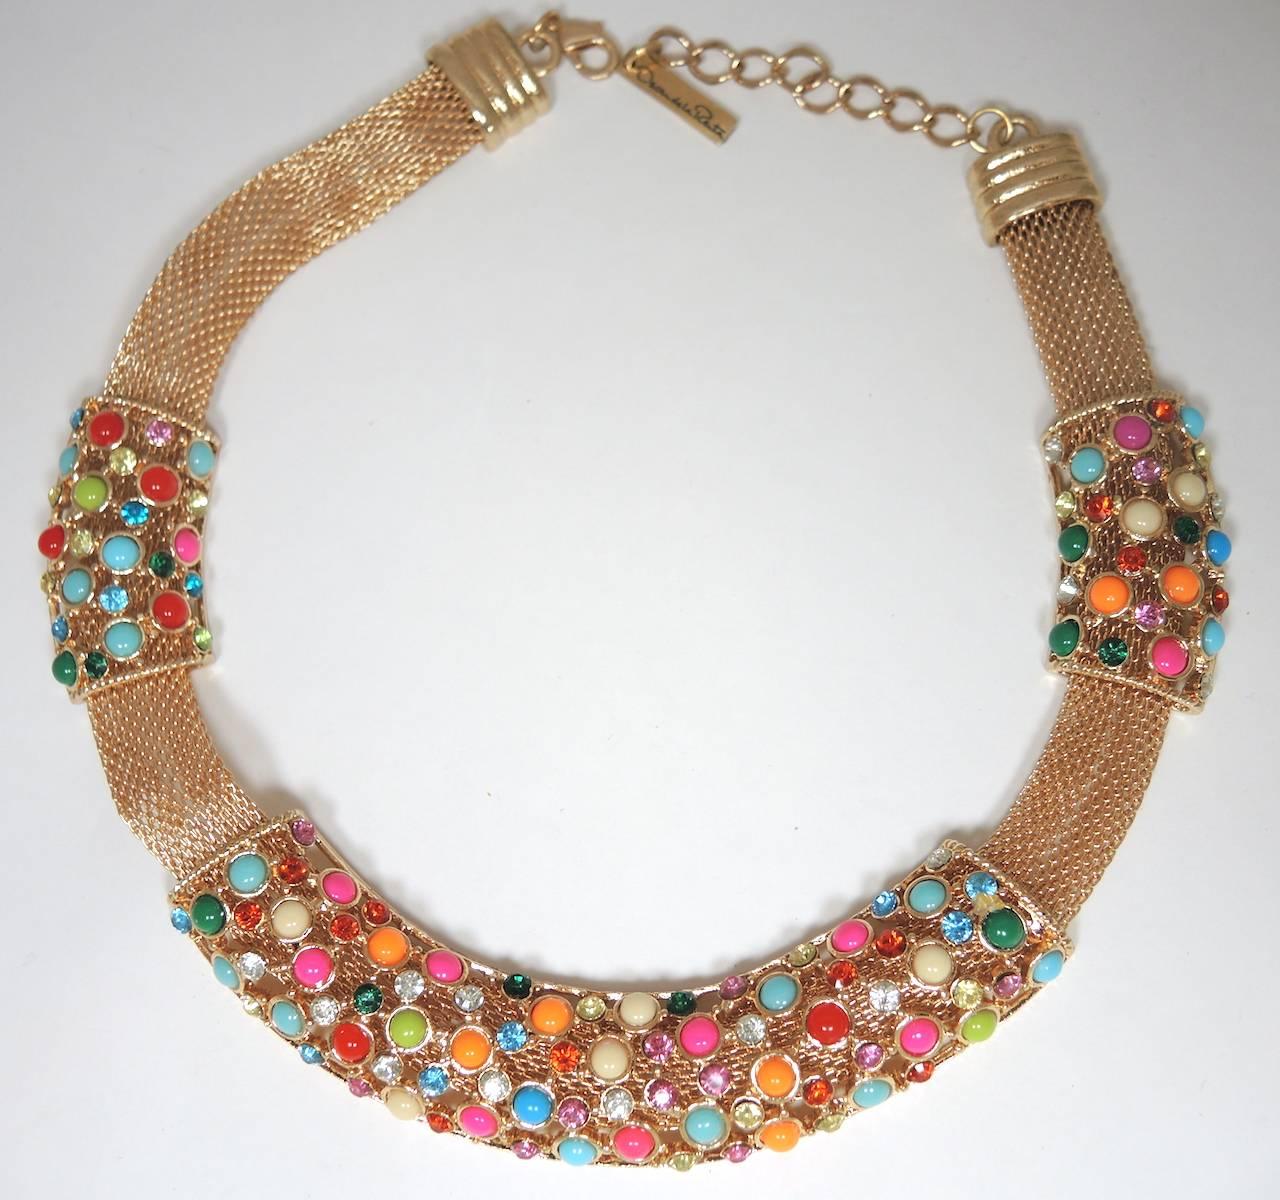 This stunning Oscar de la Renta necklace features a gold tone mesh chain with 3 movable sections of multi-color cabochon & rhinestones. The necklace measures 19” x 1-1/8” with a lobster clasp. It is signed “Oscar De La Renta” and is in excellent